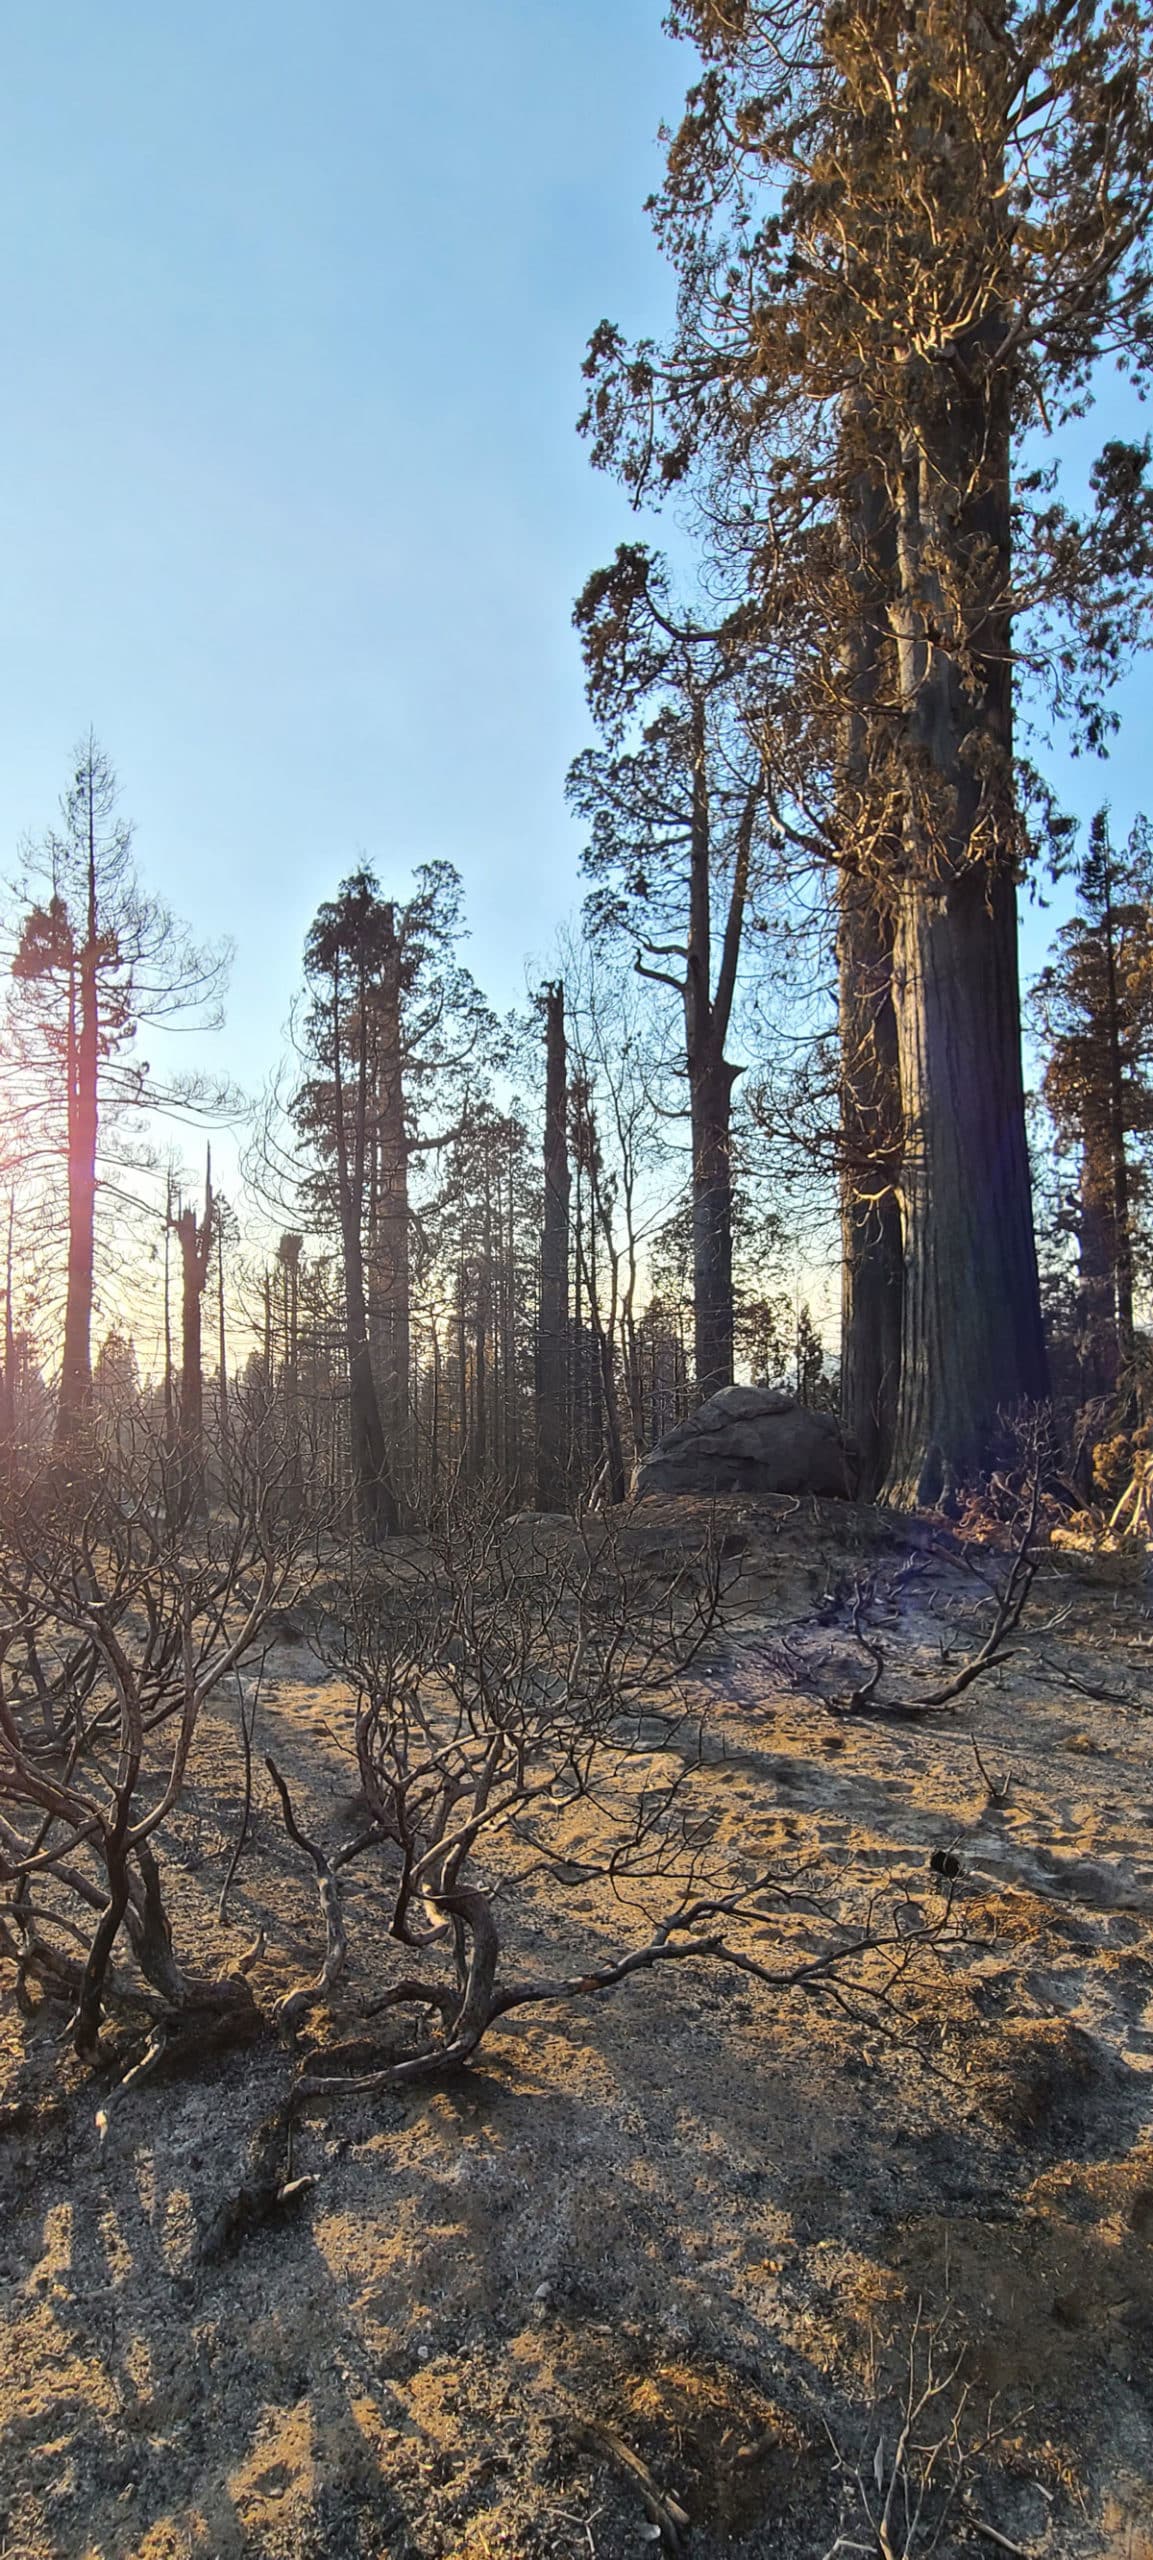 The 2020 SQF Complex Fire burned a portion of the Alder Creek property owned by Save the Redwoods League. At least 80 giant sequoia monarchs were killed in the areas where the fires burned at a high intensity.  Credit: Save the Redwoods League